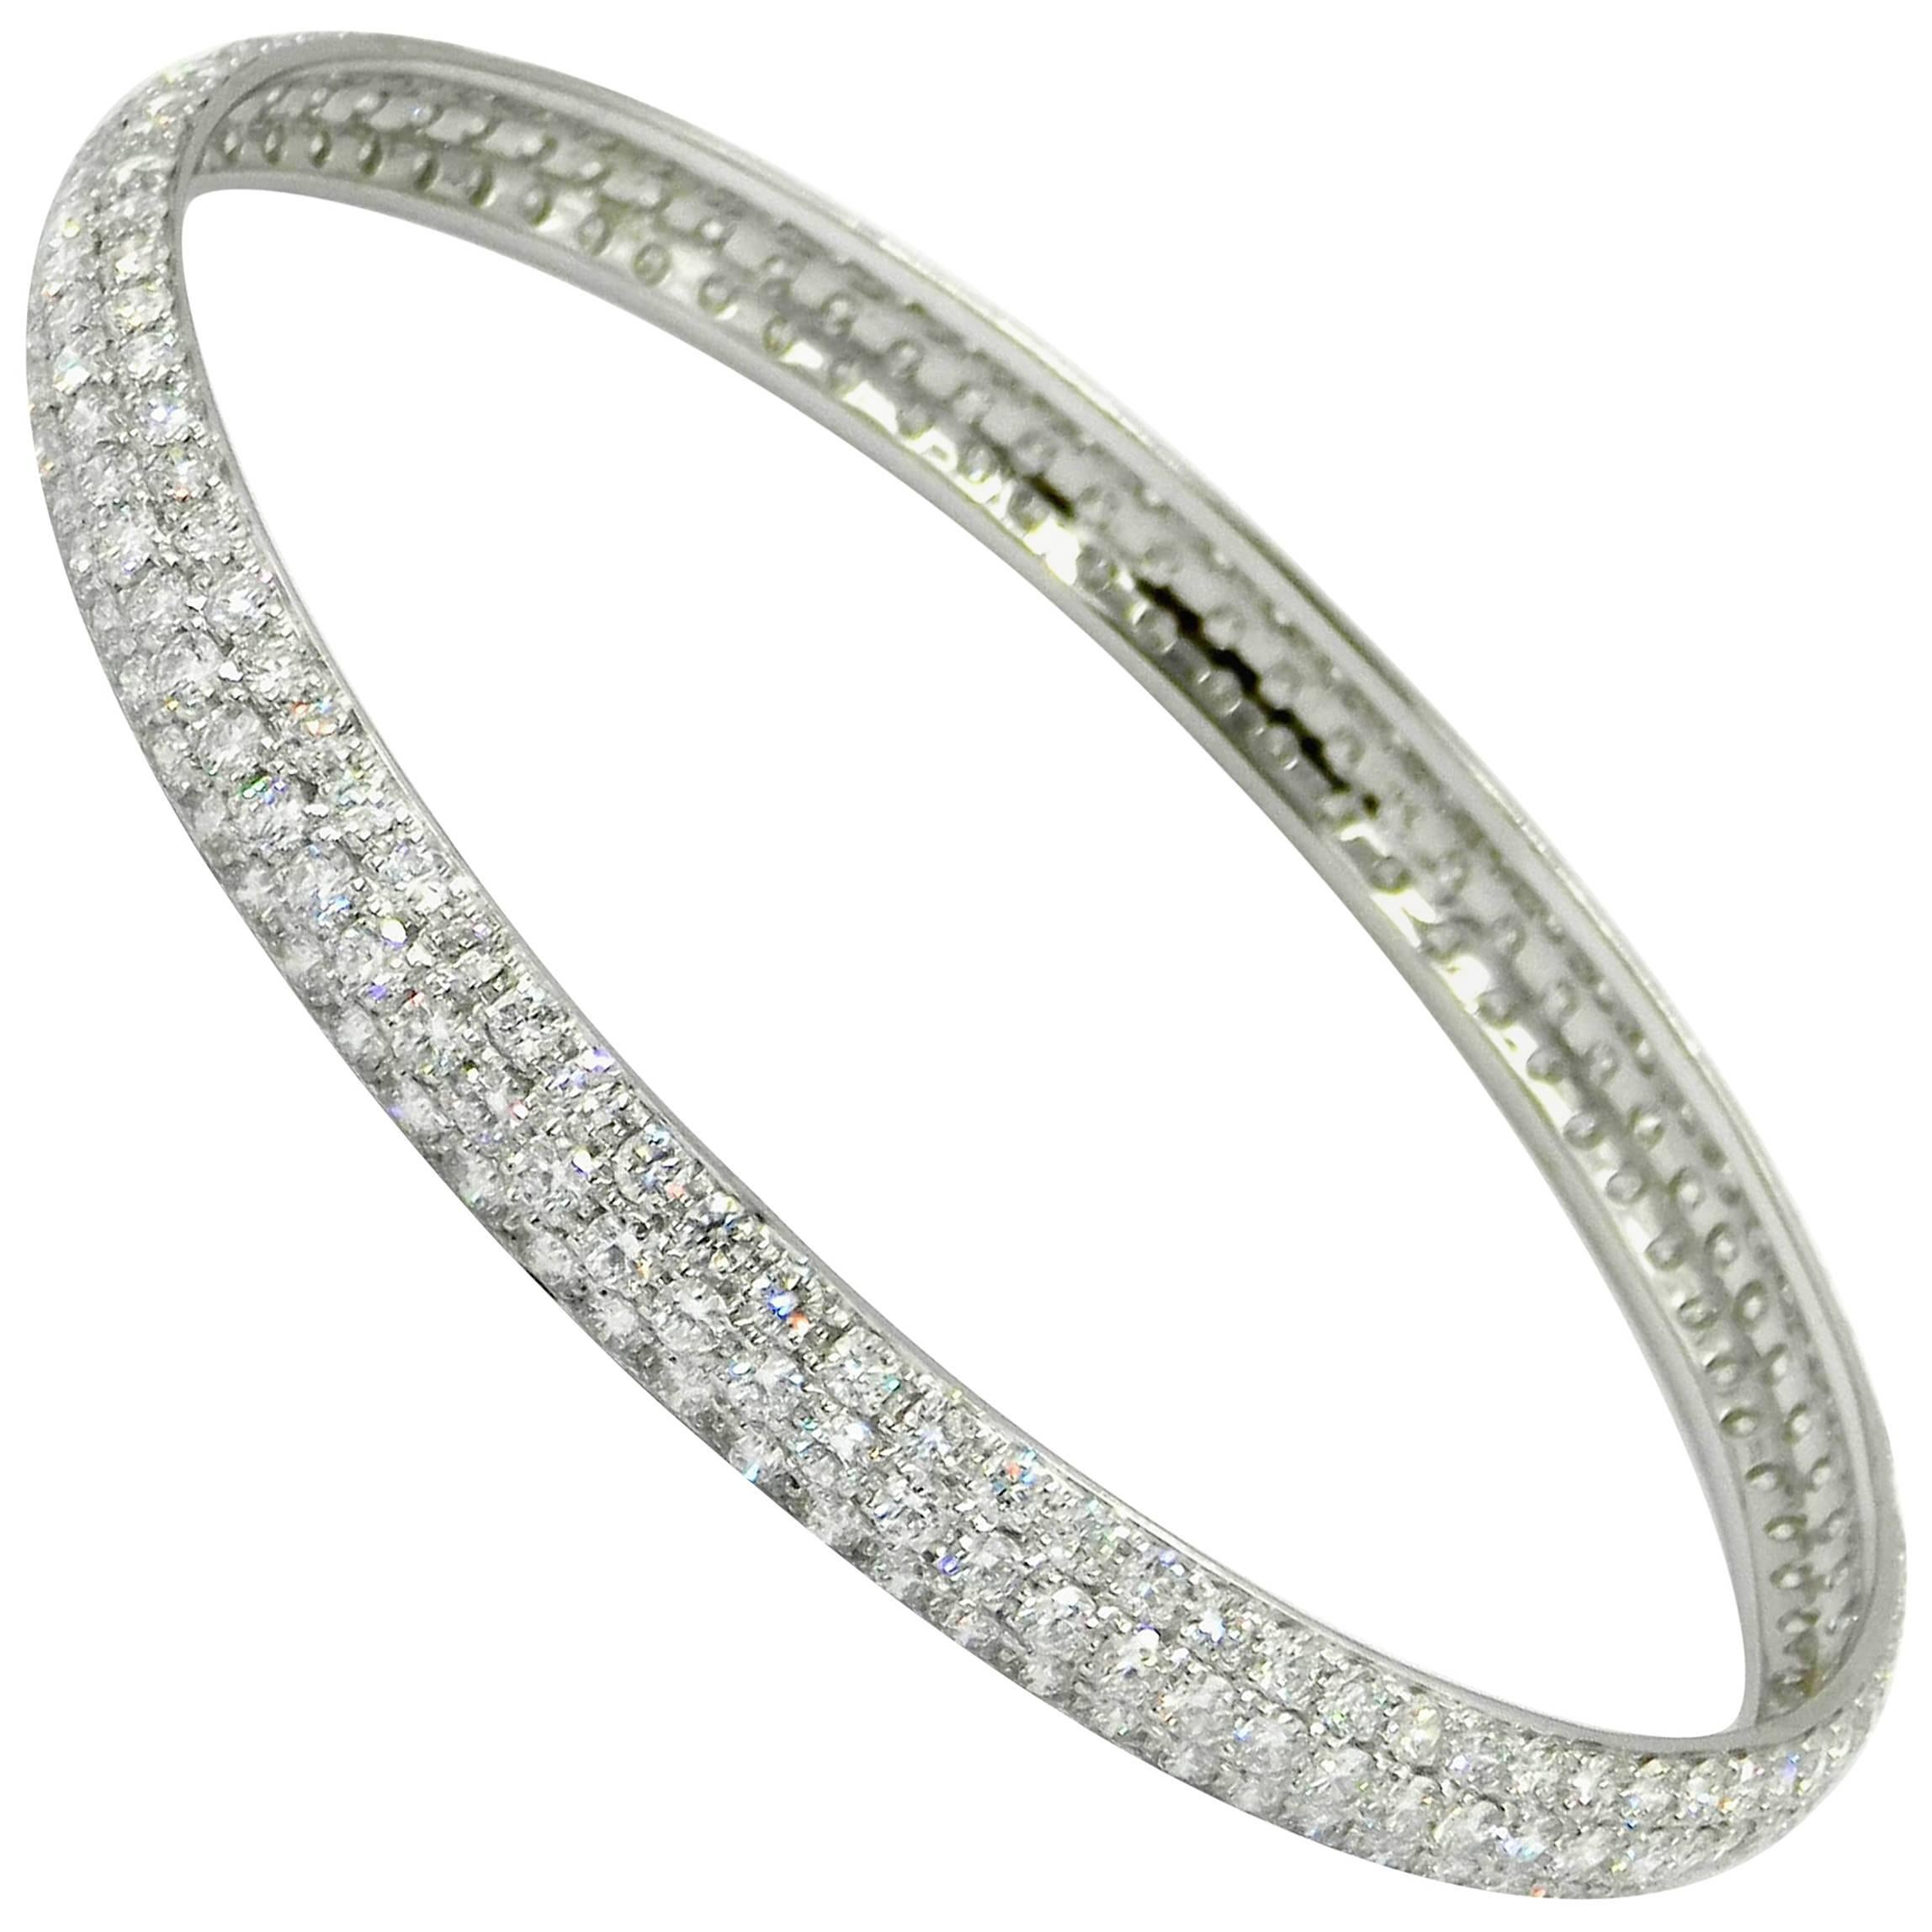 18KT White Gold Three Rows of Pavè  Diamonds BRACELET 
Perfectly Round Bangle Slip On - Inside Diameter  MM  65 
18kt GOLD  : 15,30
WHITE  DIAMONDS total ct : 9.7
The black diamonds version is also available for a perfect set of two.